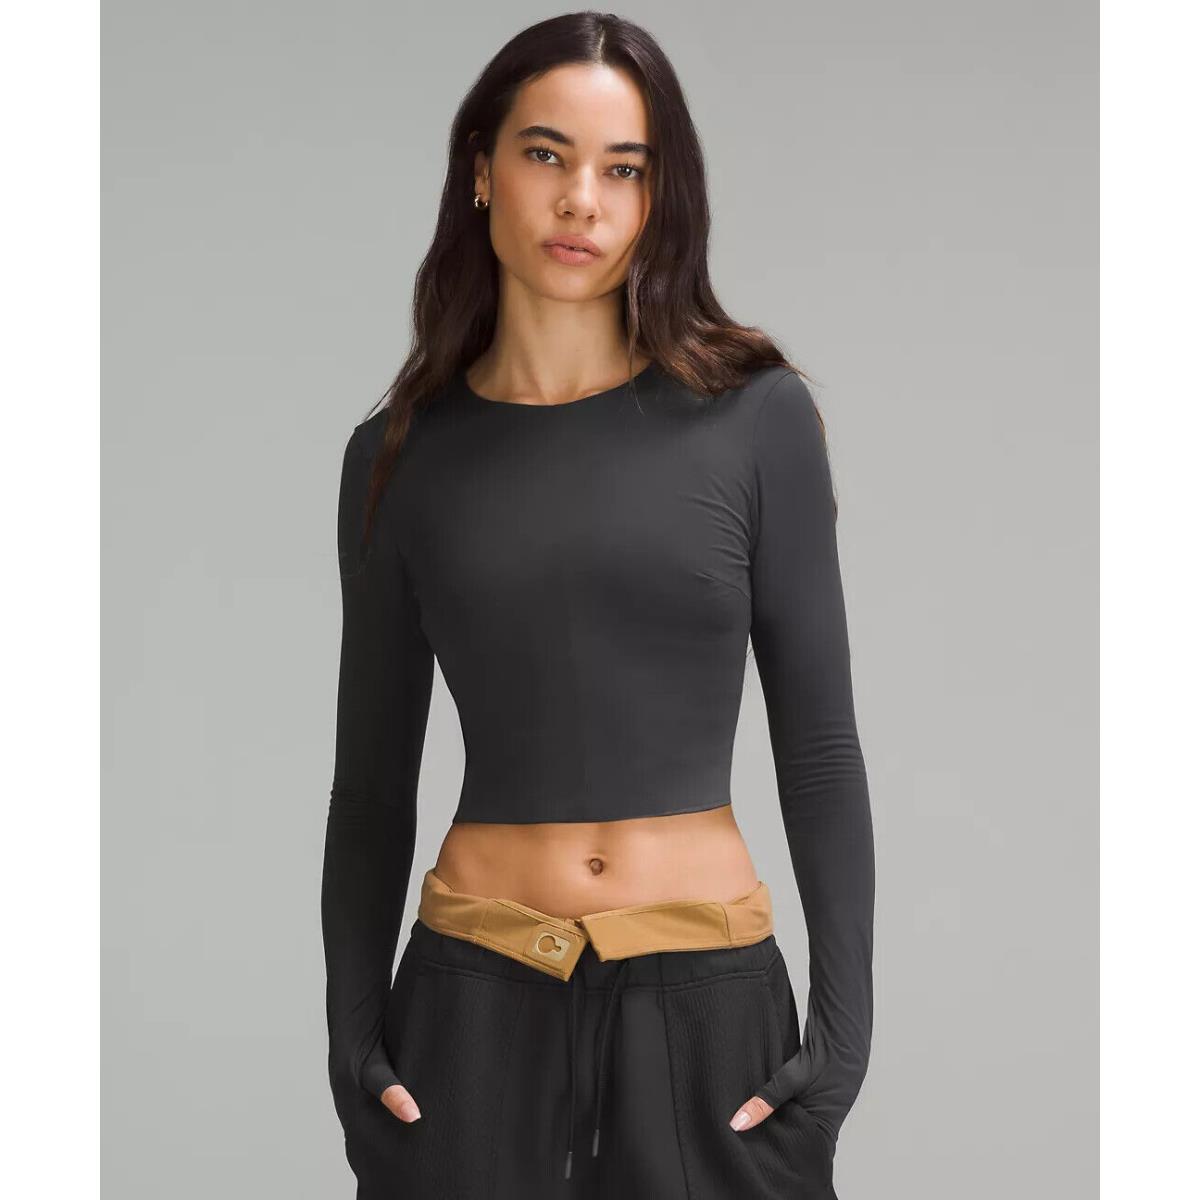 Lululemon Tight-fit Lined Long Sleeve - Retail